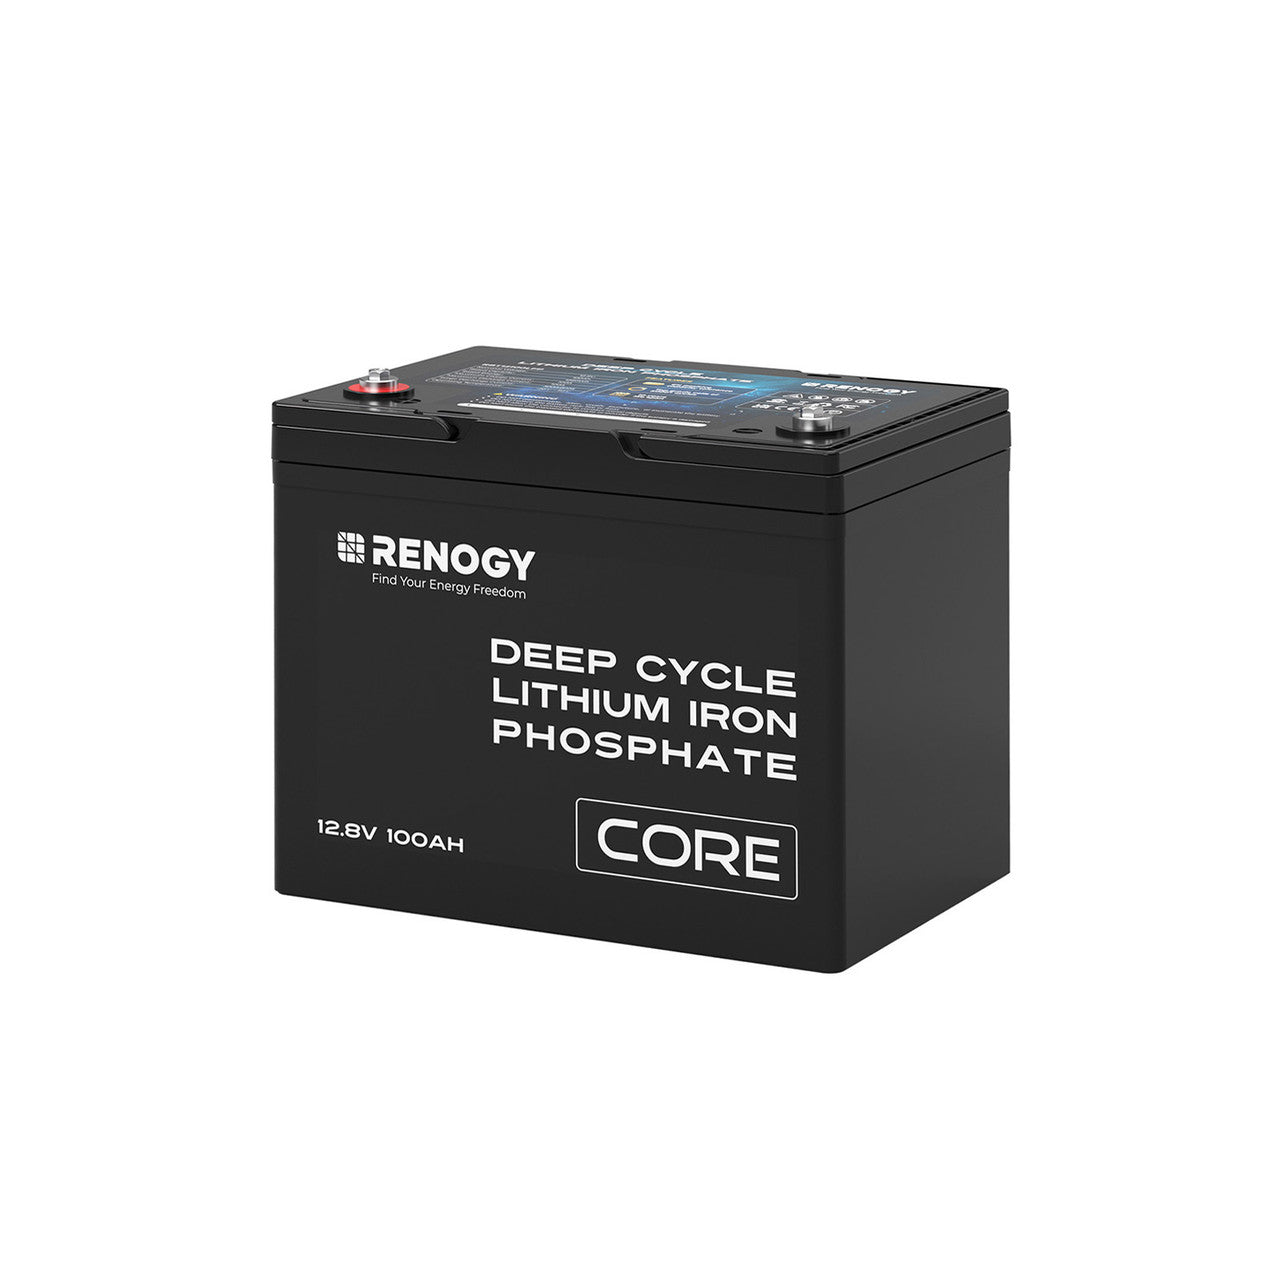 Renogy 12V 100Ah Core Series Deep Cycle Lithium Iron Phosphate Battery - Solar Generators and Power Stations Plus